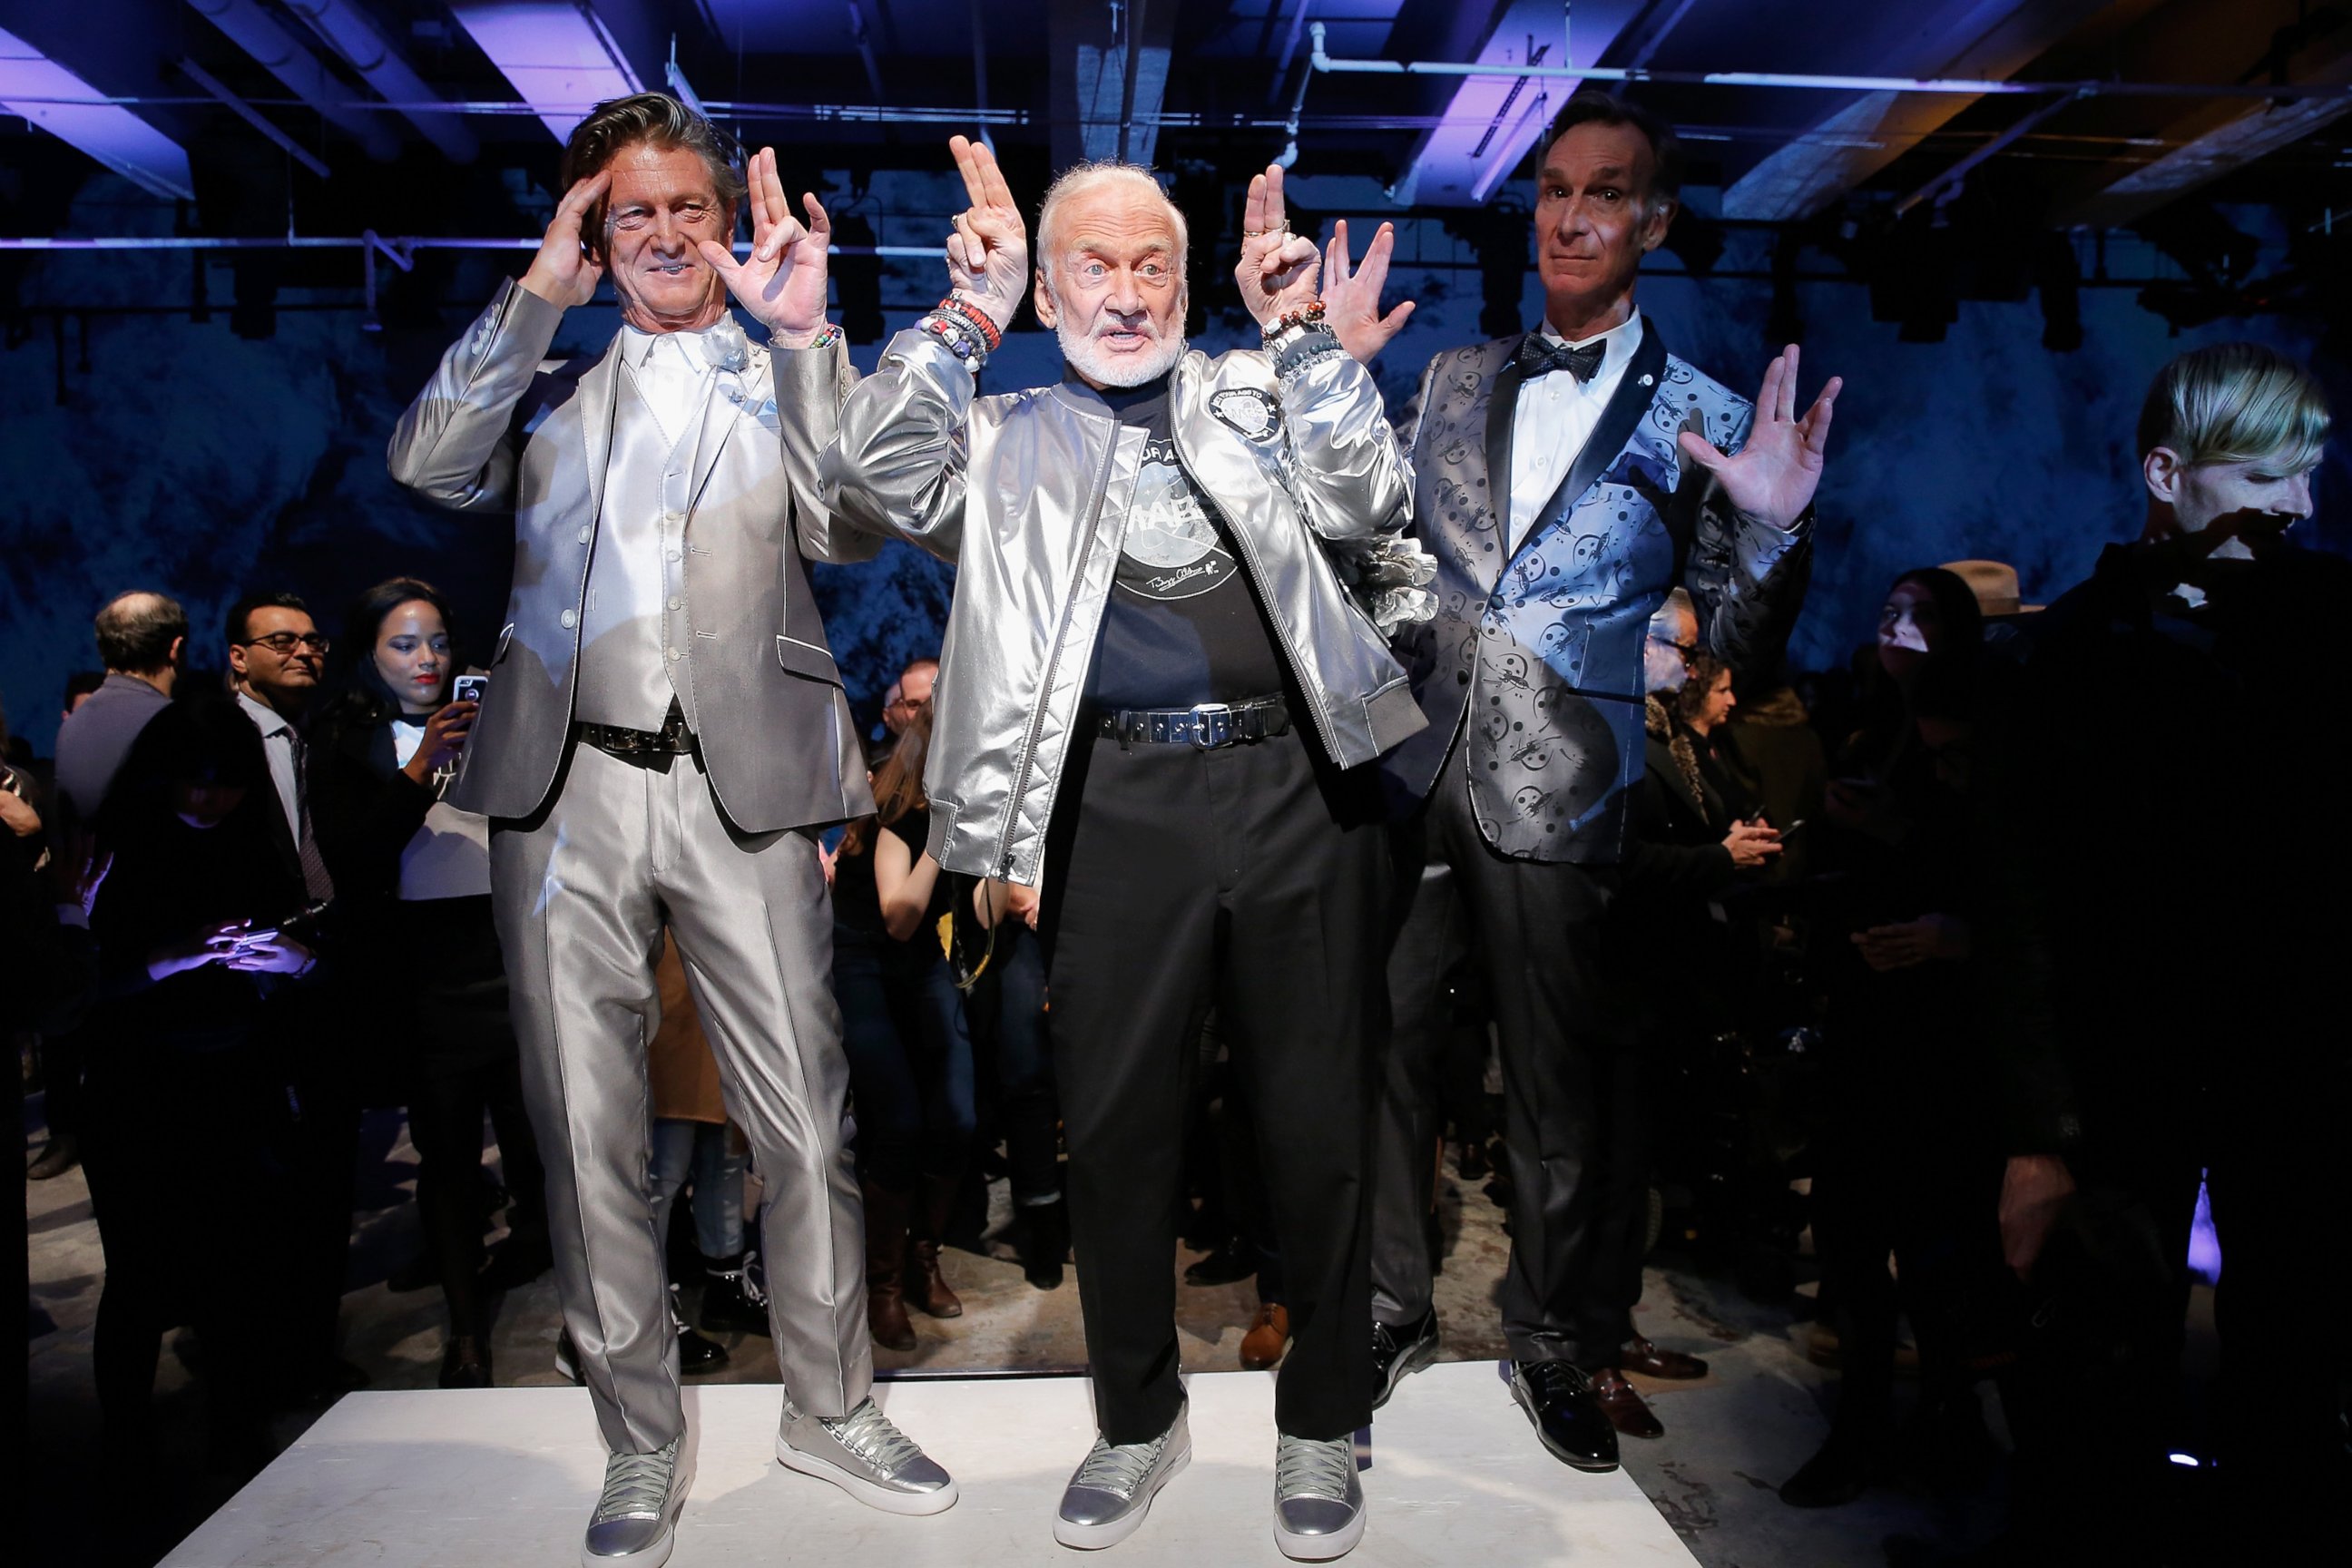 PHOTO: Nick Graham, Buzz Aldrin and Bill Nye pose on the runway at the Nick Graham NYFW Men's F/W '17 show on Jan. 31, 2017 in New York.